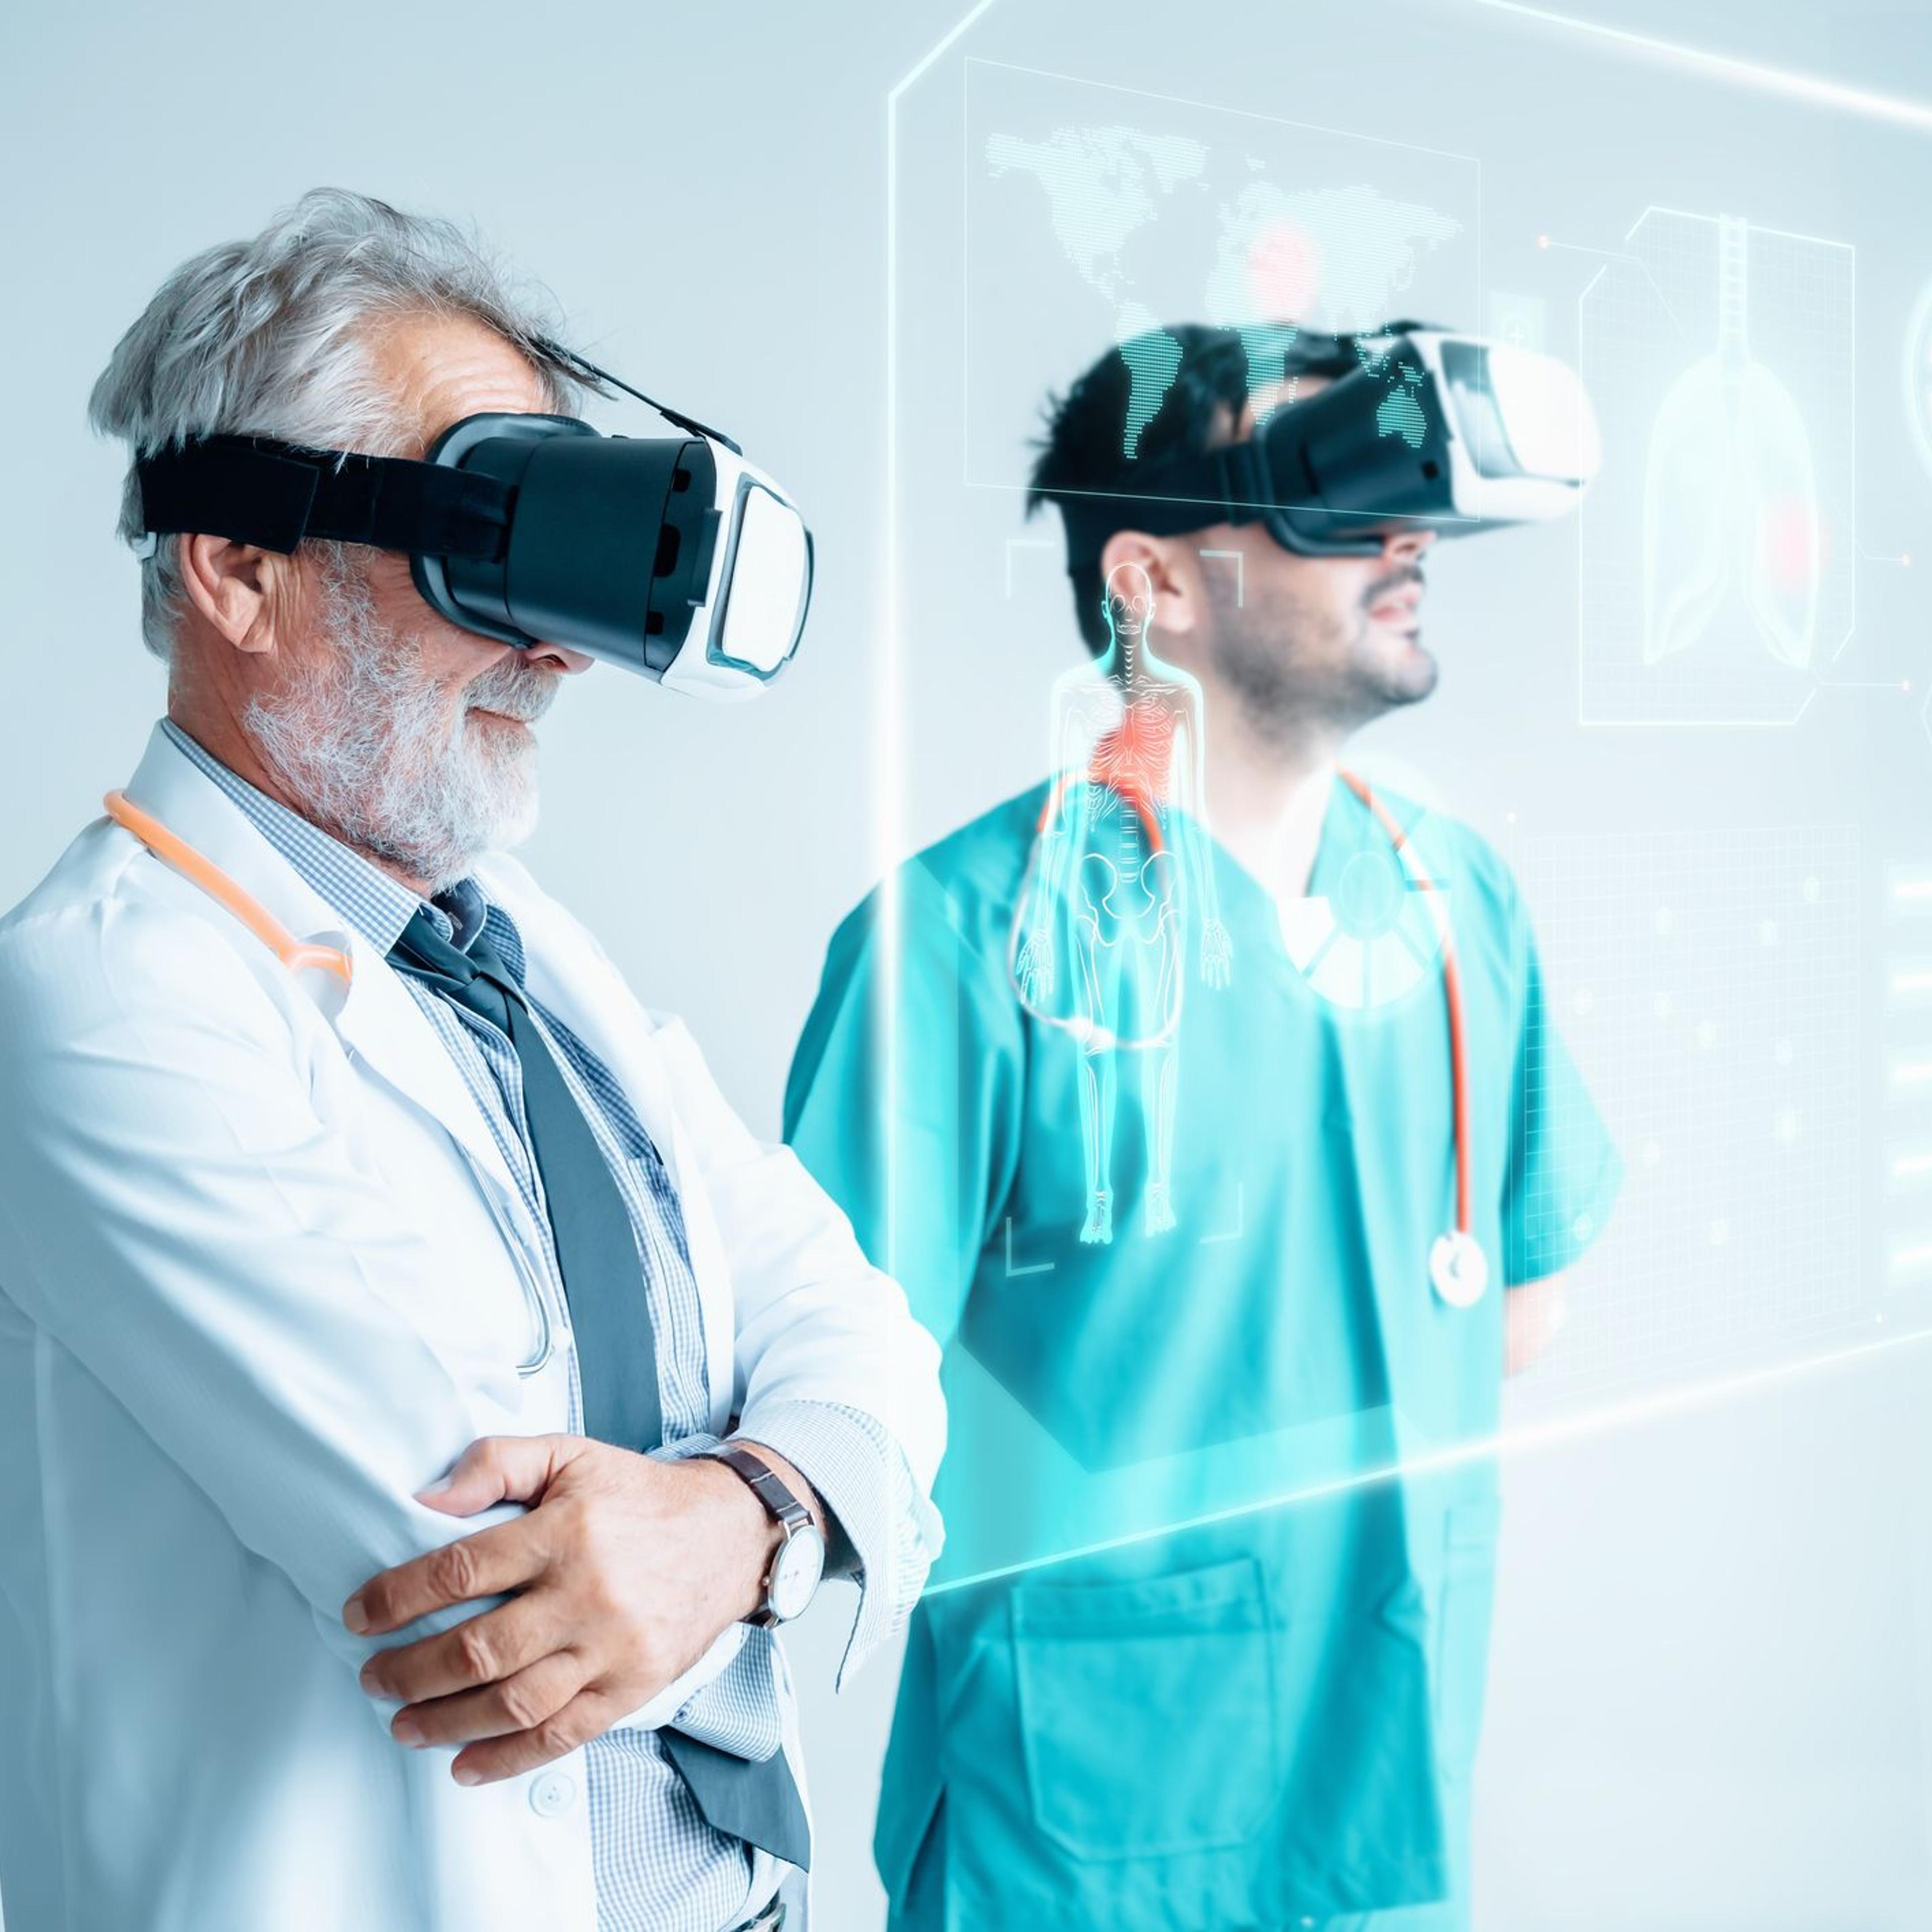 Futuristic Medical Diagnose Through Virtual Reality Glasses Simulator and Screen Interactive, Doctor Team Disease Diagnosis Patient Health on 3D VR Headset in Hospital Surgical Room.